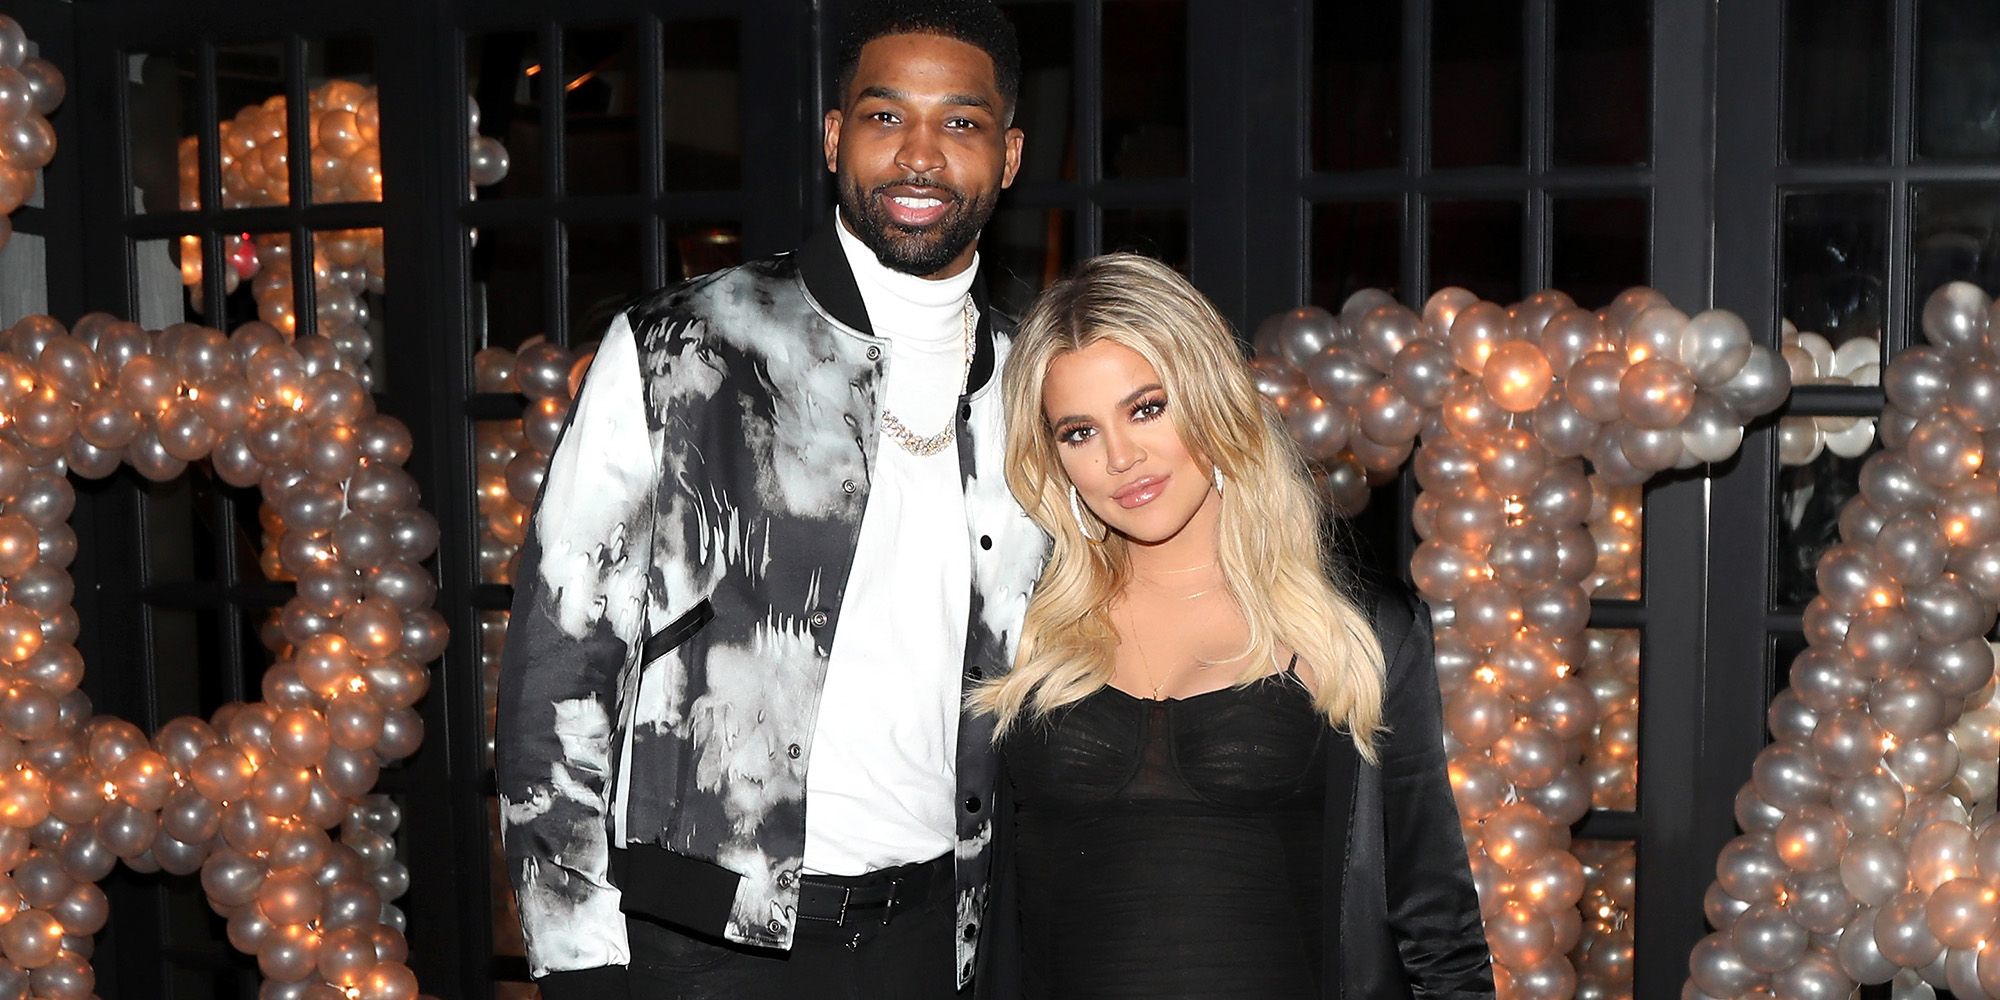 Khloe Kardashian Hints She And Tristan Thompson Are Together